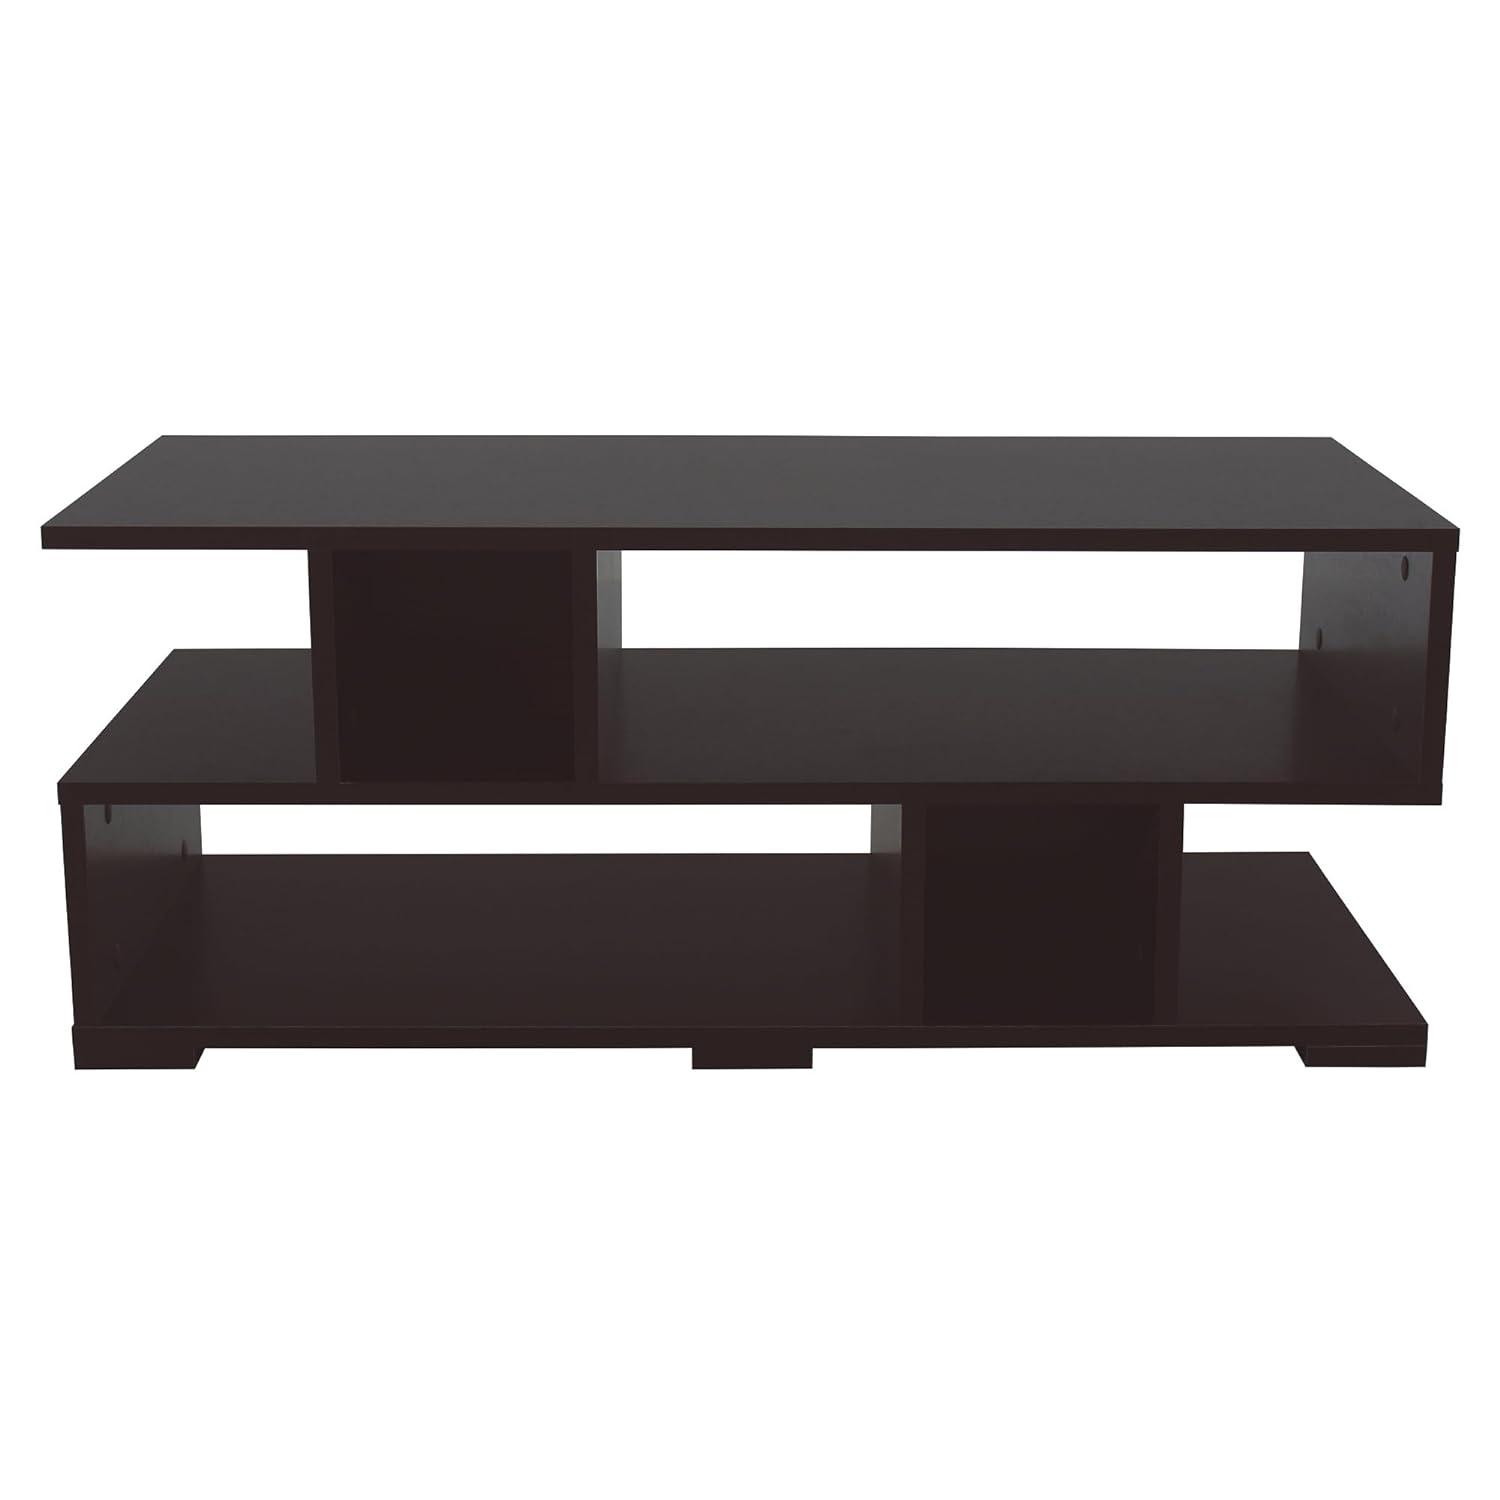 Modern and Elegant TV Stand, Media Console for Living Room, TV stand for Bedroom, TV Cabinet with shelves